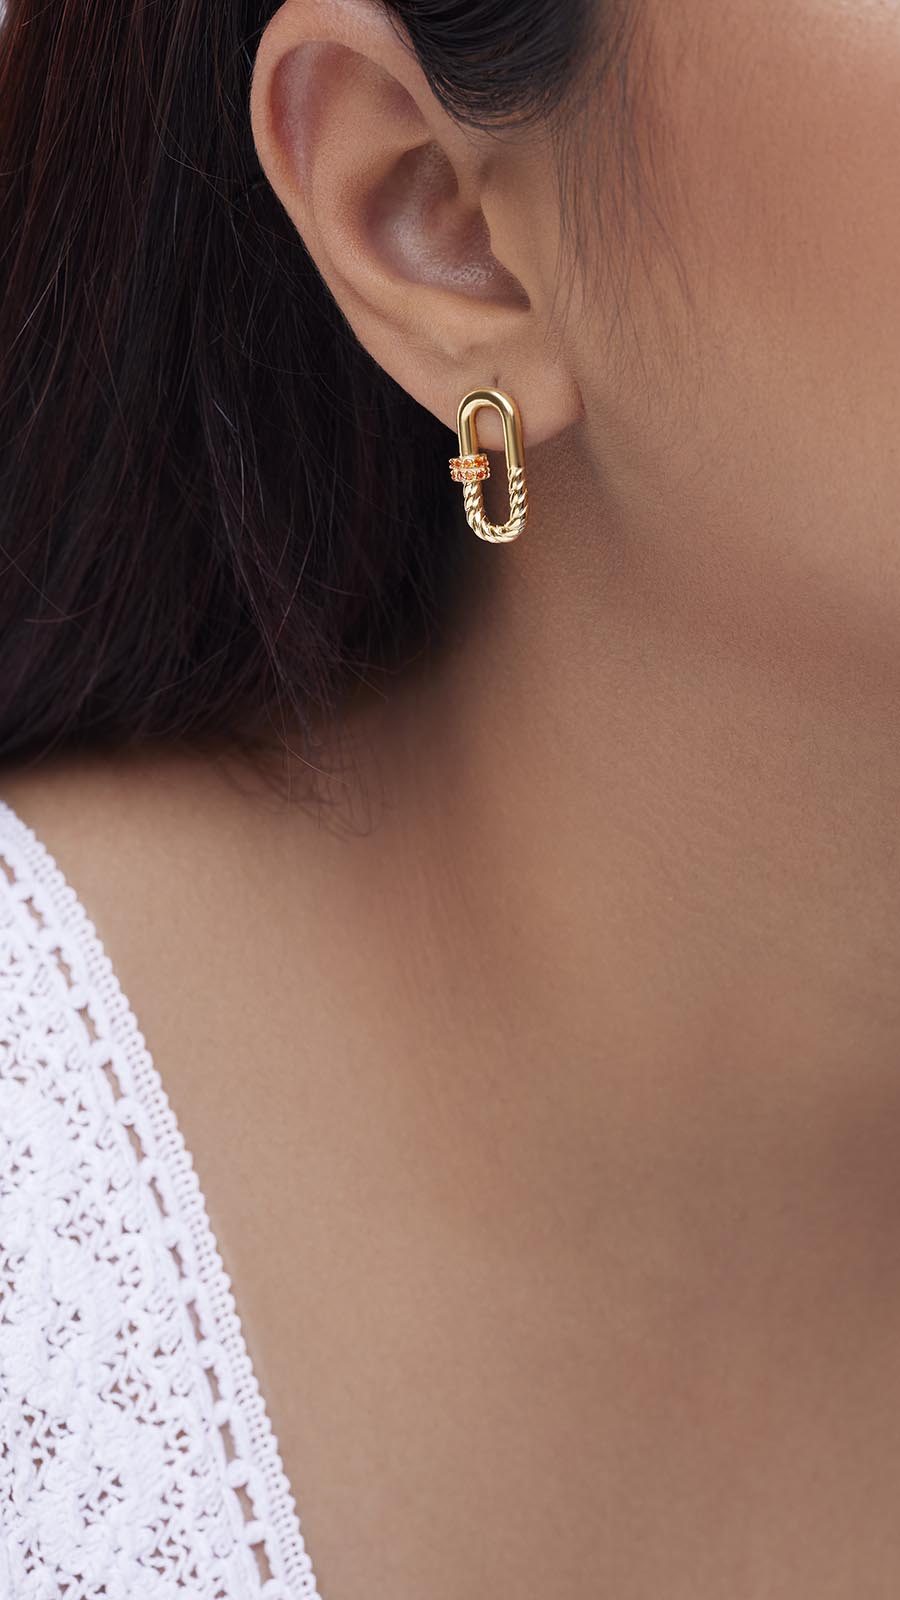 Zoomed picture of an Indian working woman wearing strength earrings